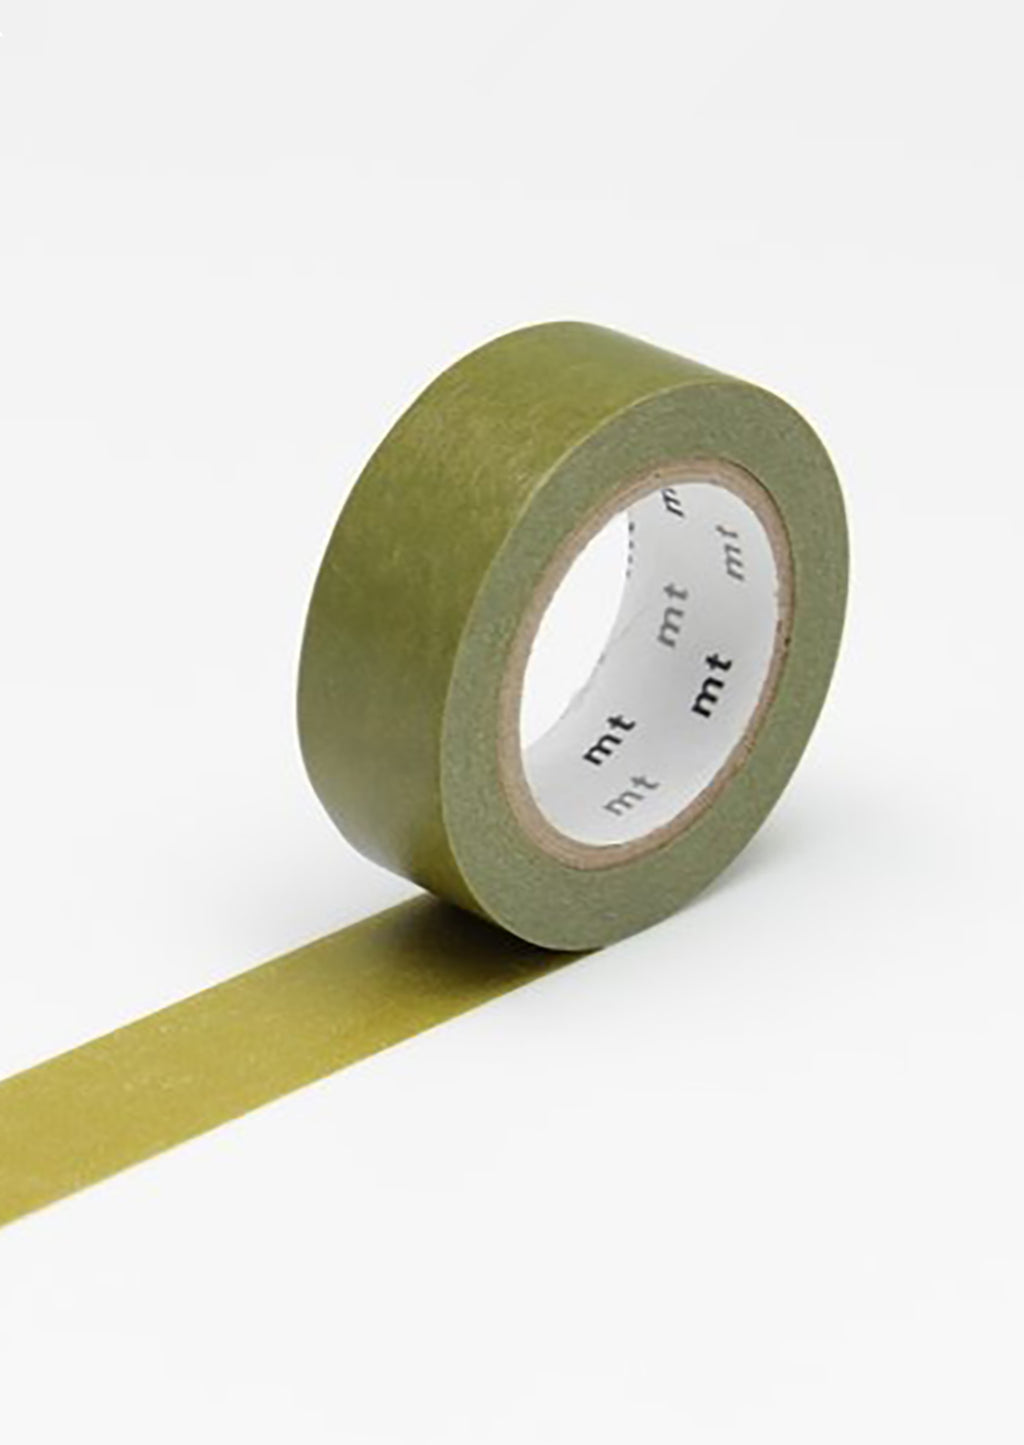 Olive: A roll of washi tape in solid olive color.